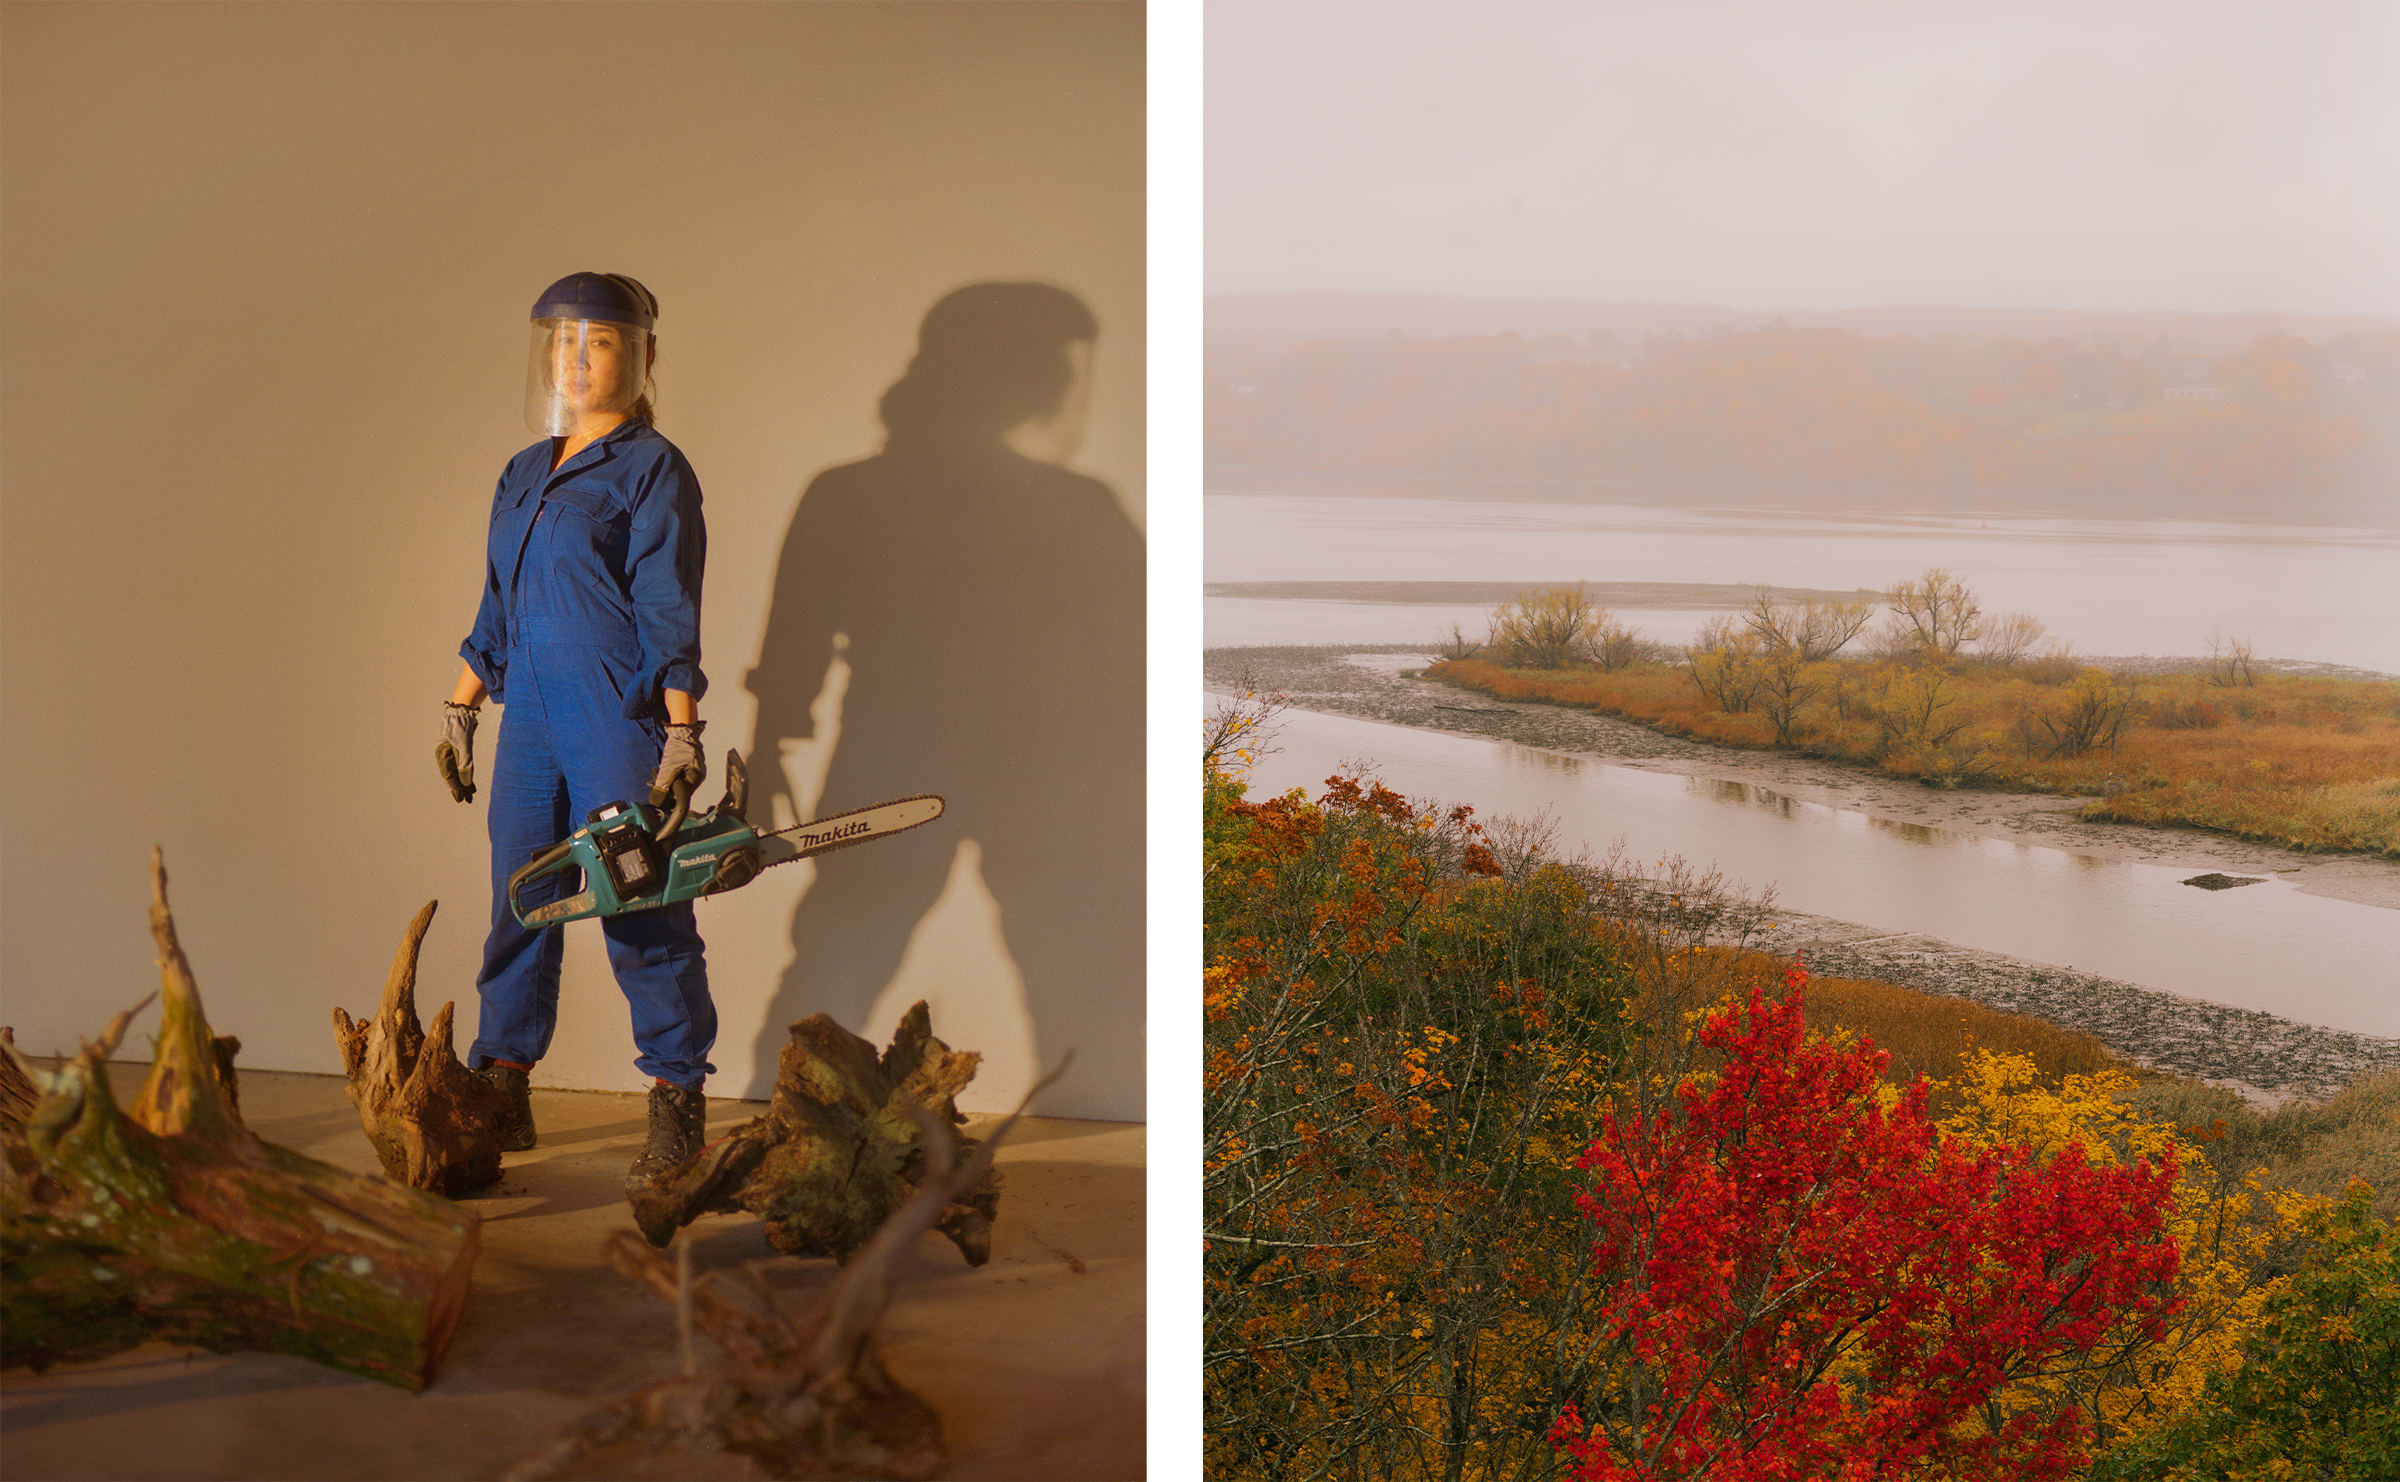 Left: Moko Fukuyama, the artist-in-residence at STONELEAF retreat, in partnership with the River Valley Arts Collective and Al Held Foundation. Left: The Hudson Valley. Photos by Tonje Thilesen for Art Basel.